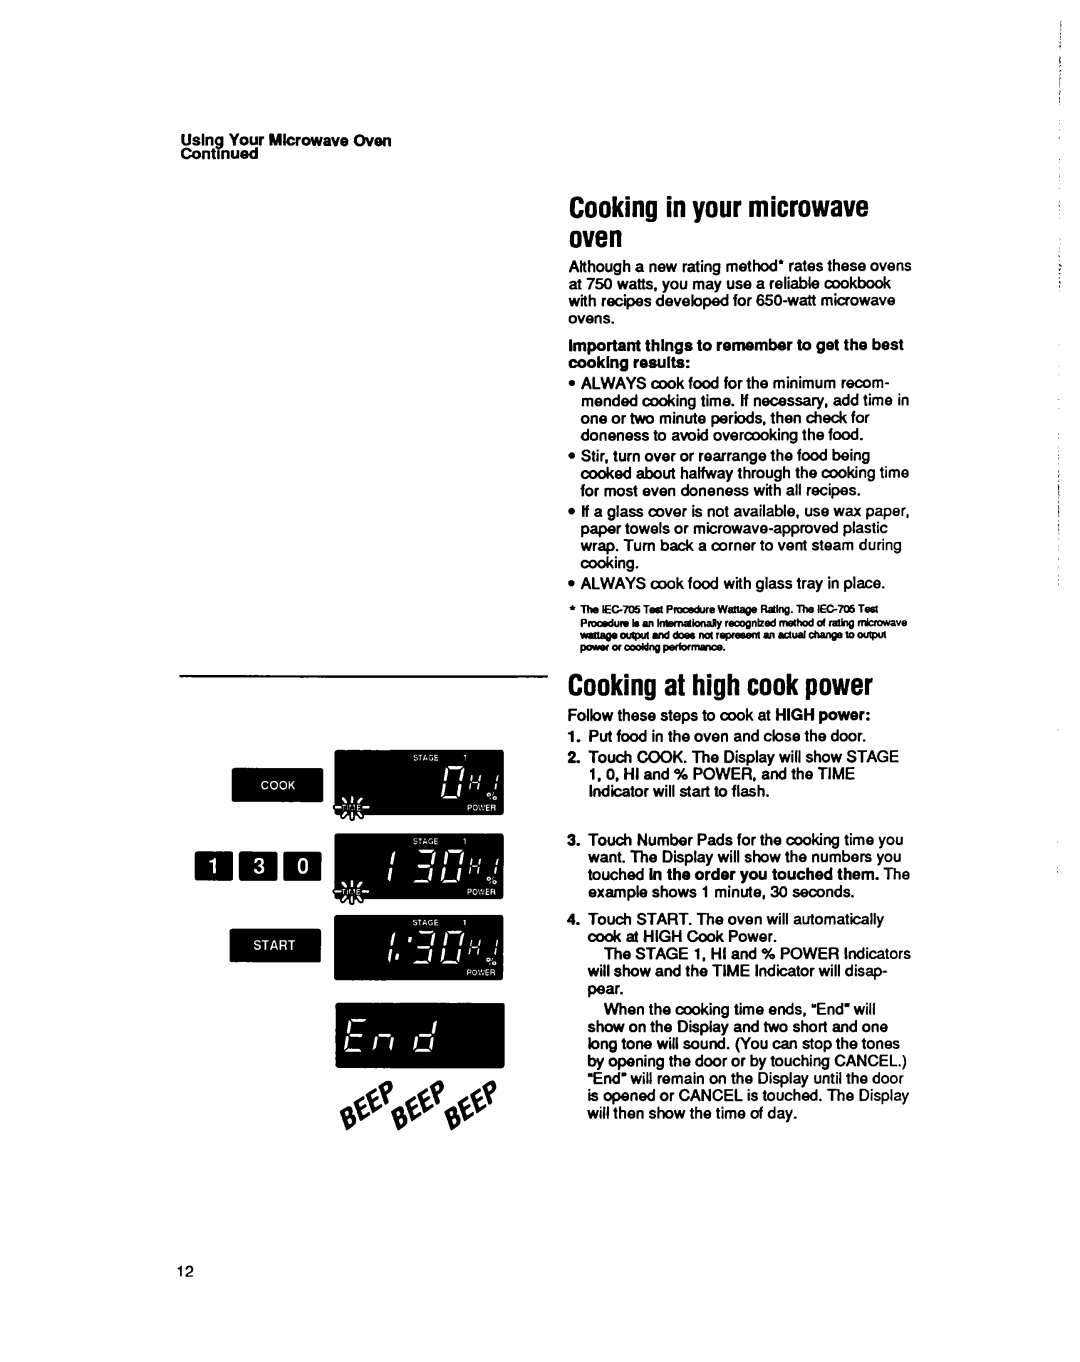 Whirlpool MS3080XY user manual Cookingin your microwave oven, Cookingat high cookpower, Uslng Your Microwave Oven Contmued 